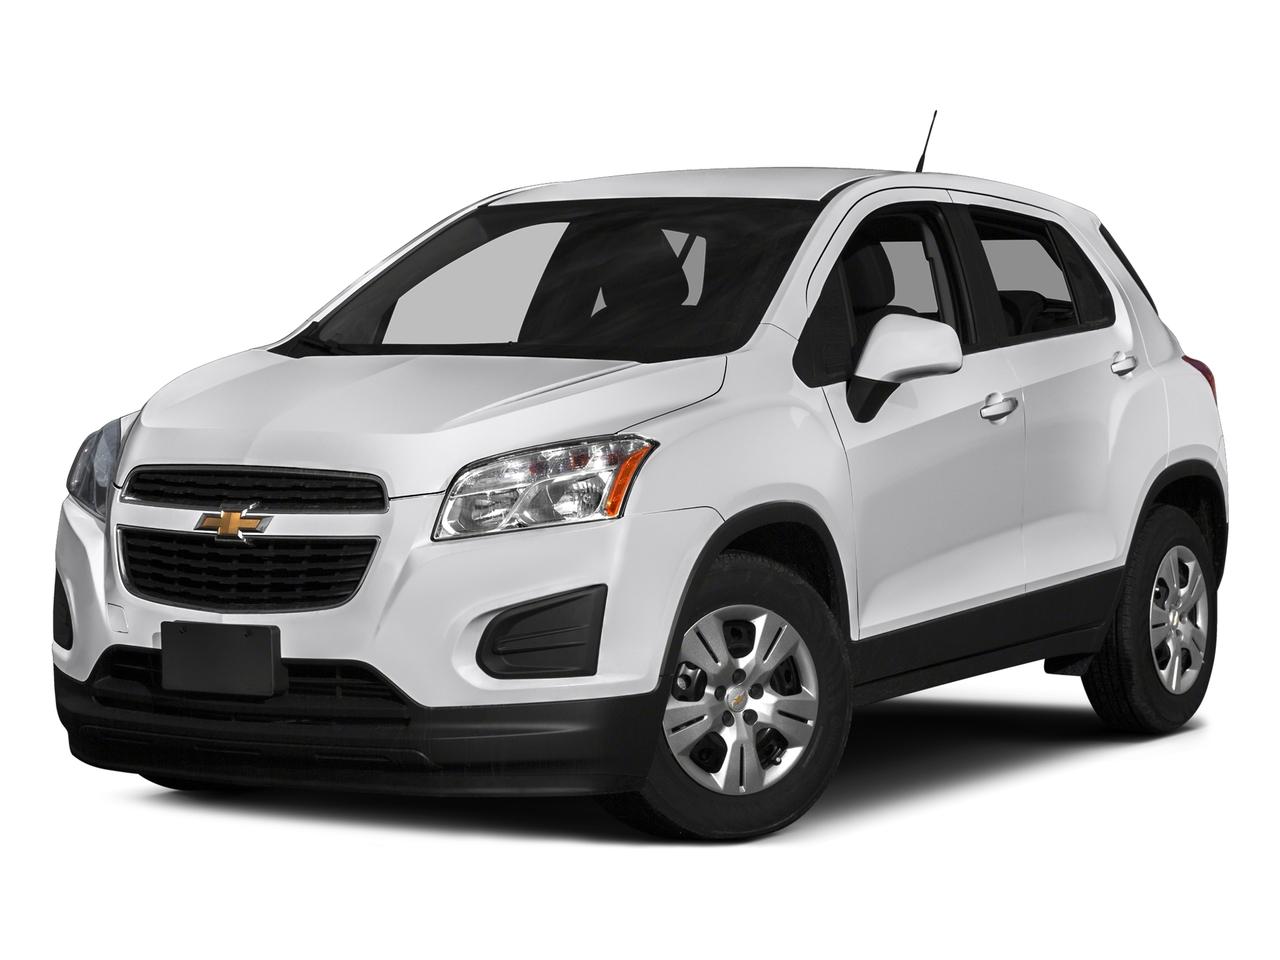 2016 Chevrolet Trax Vehicle Photo in WILLIAMSVILLE, NY 14221-4303